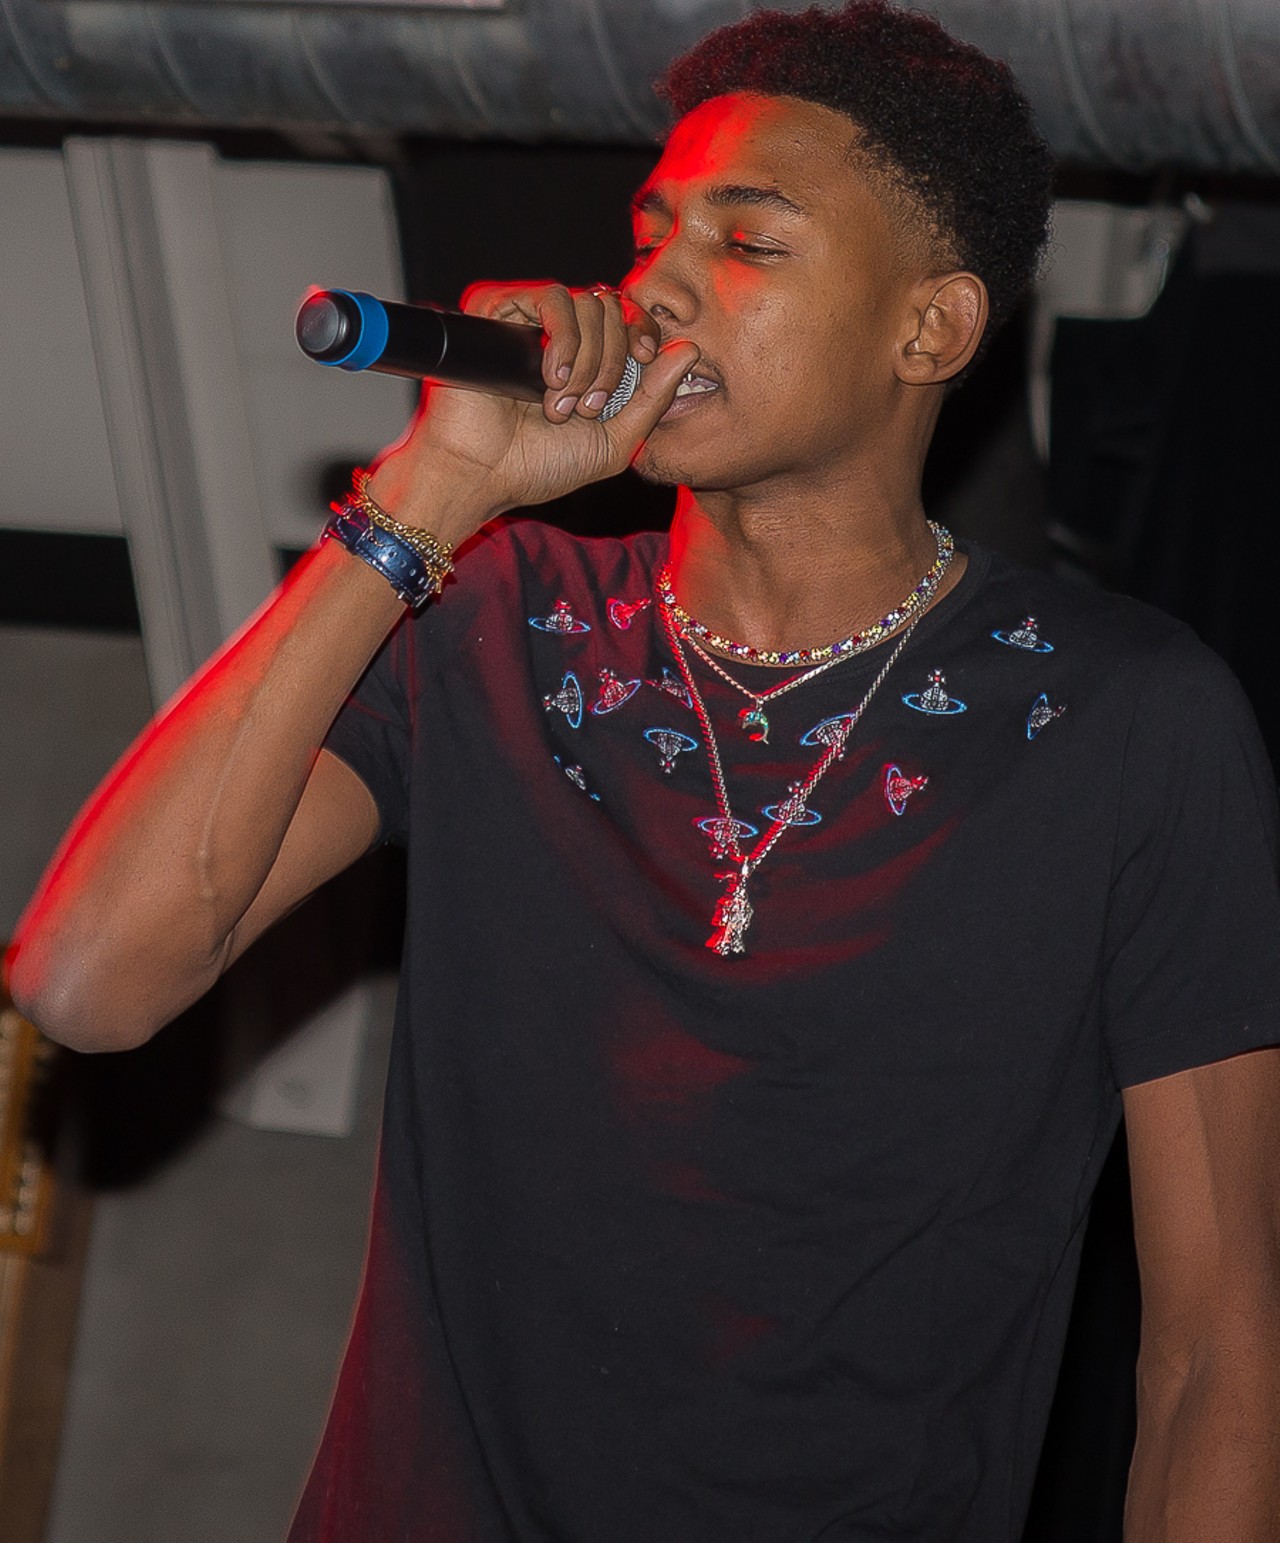 ZELOOPERZ performs at The Loving Touch in Ferndale, to celebrate the upcoming release of his record BOTHIC.